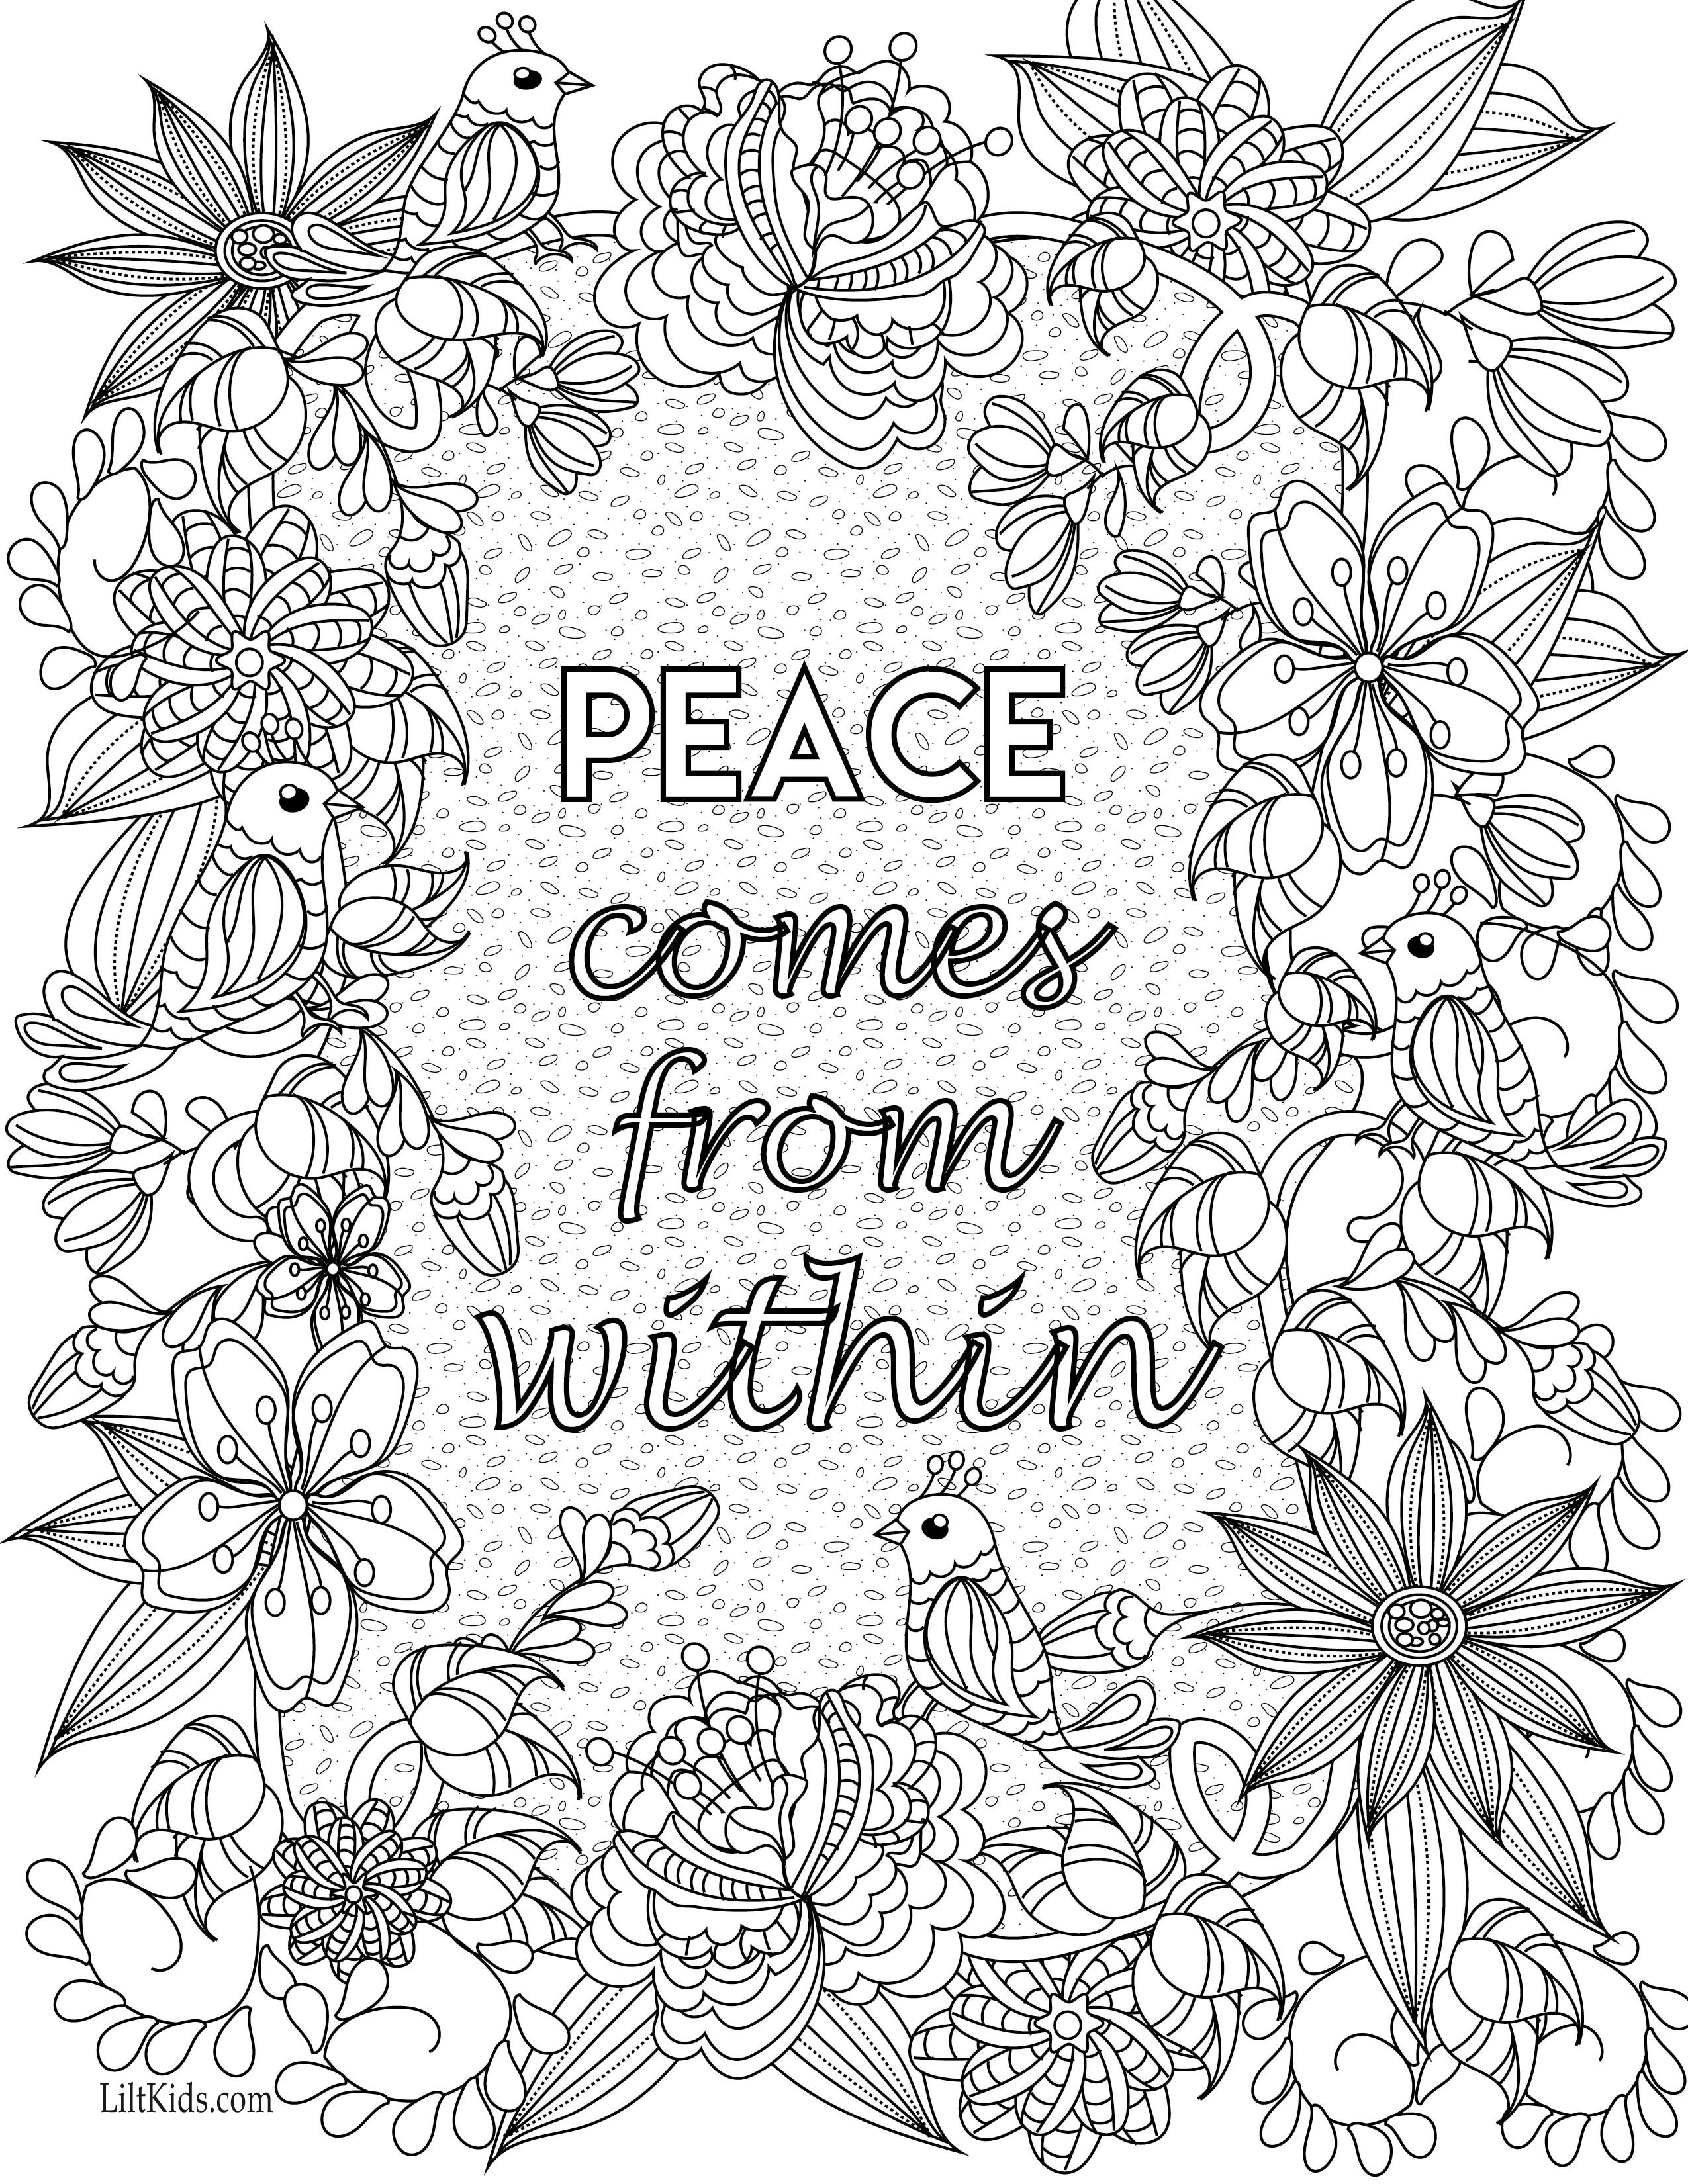 Quote Coloring Pages Pdf
 plete Quote Coloring Pages Pdf PDF For Adult To